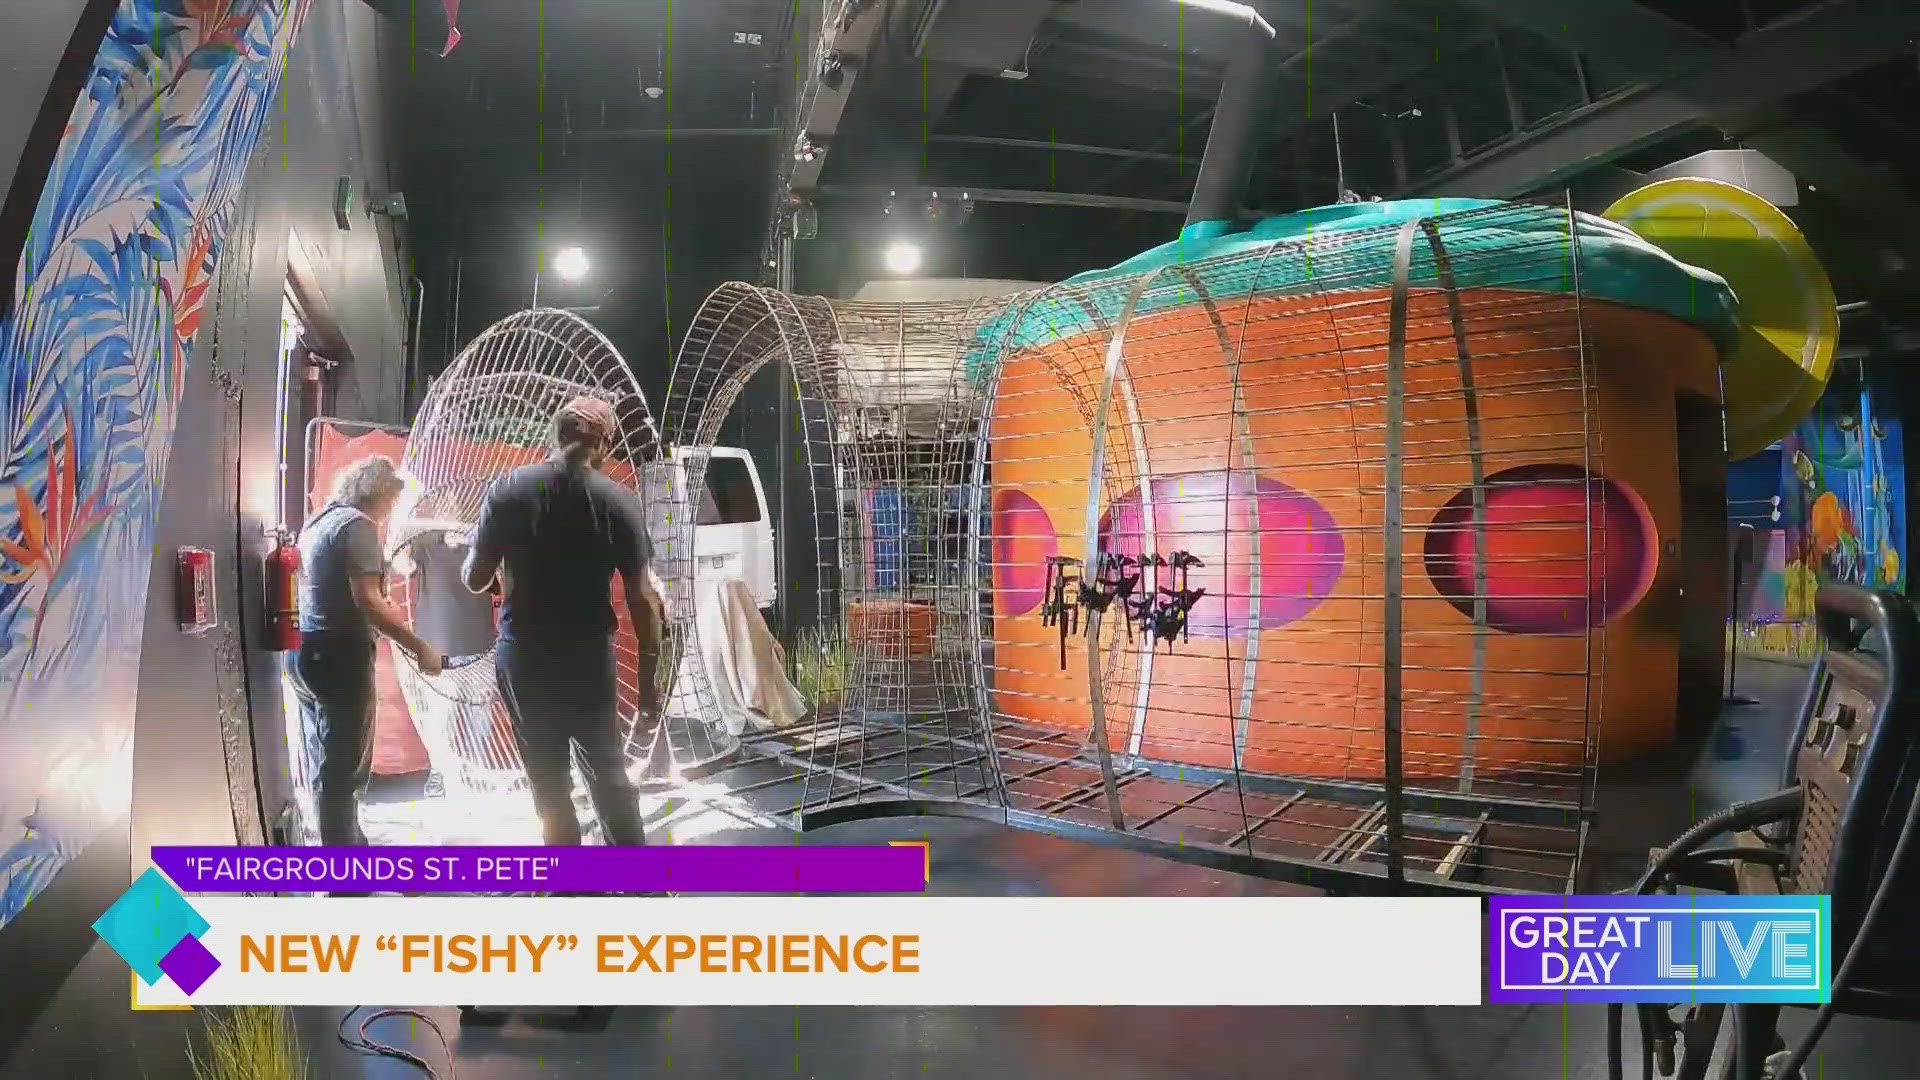 Something fishy, funky and fun is happening at Fairgrounds. GDL got a preview from the St. Pete art house.